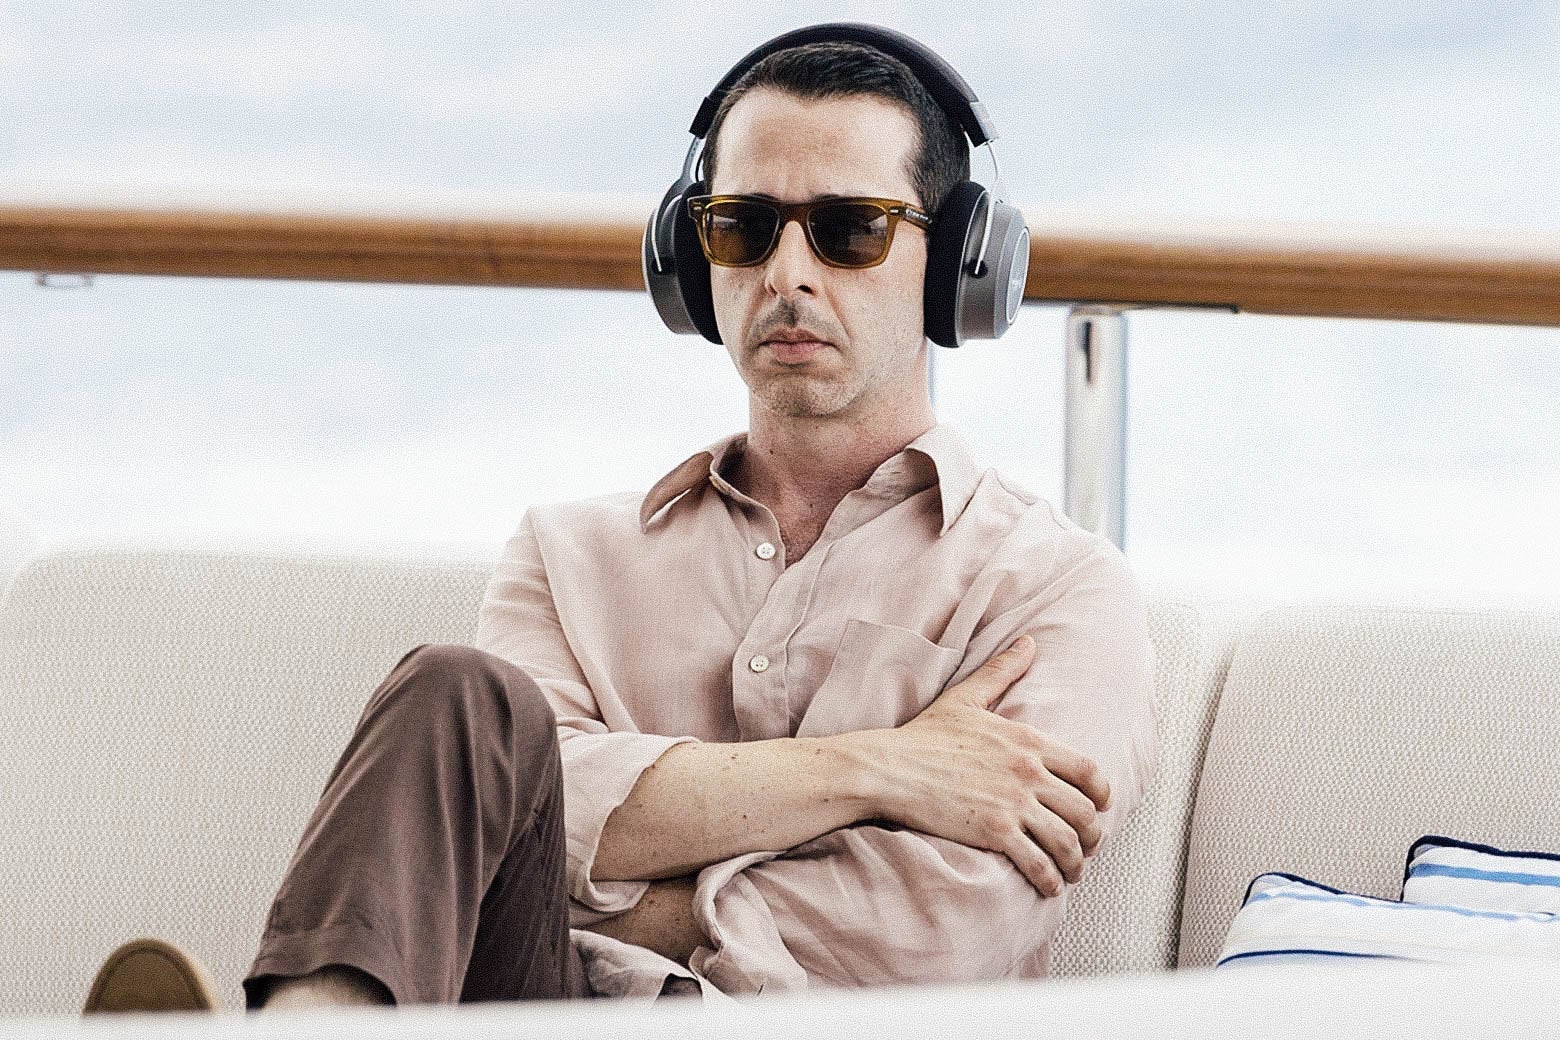 A man crosses his arms against his chest while wearing large headphones and sitting on a yacht.